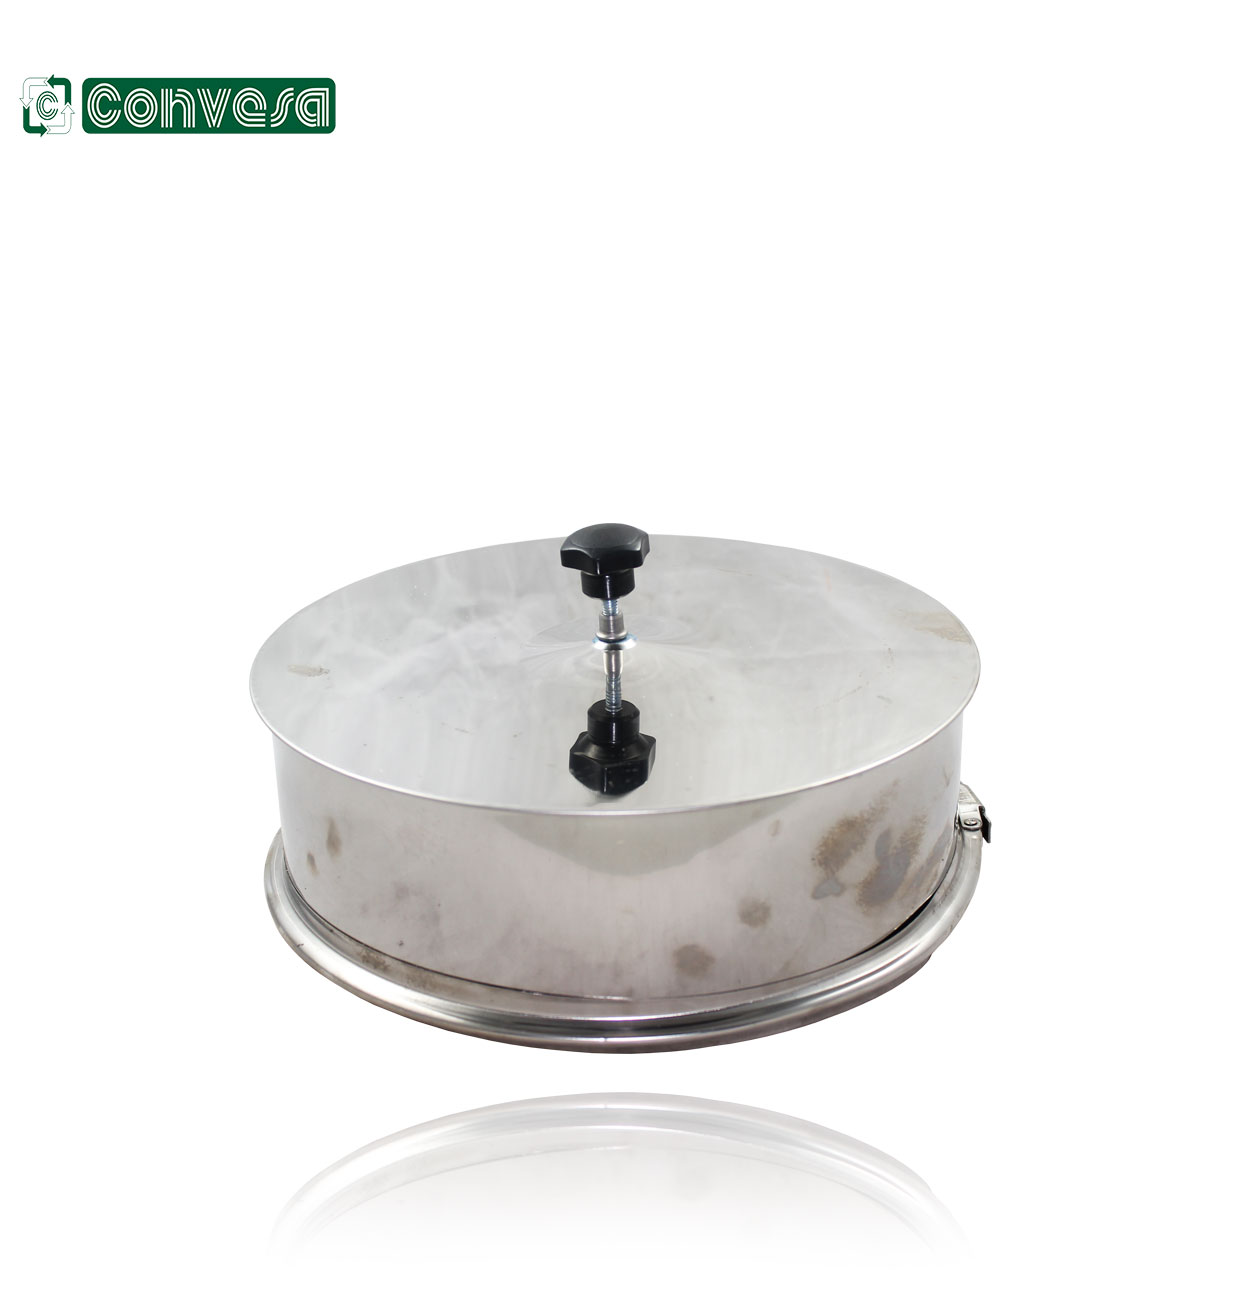 INSULATED COVER + 200 diameter STAINLESS STEEL CLAMP